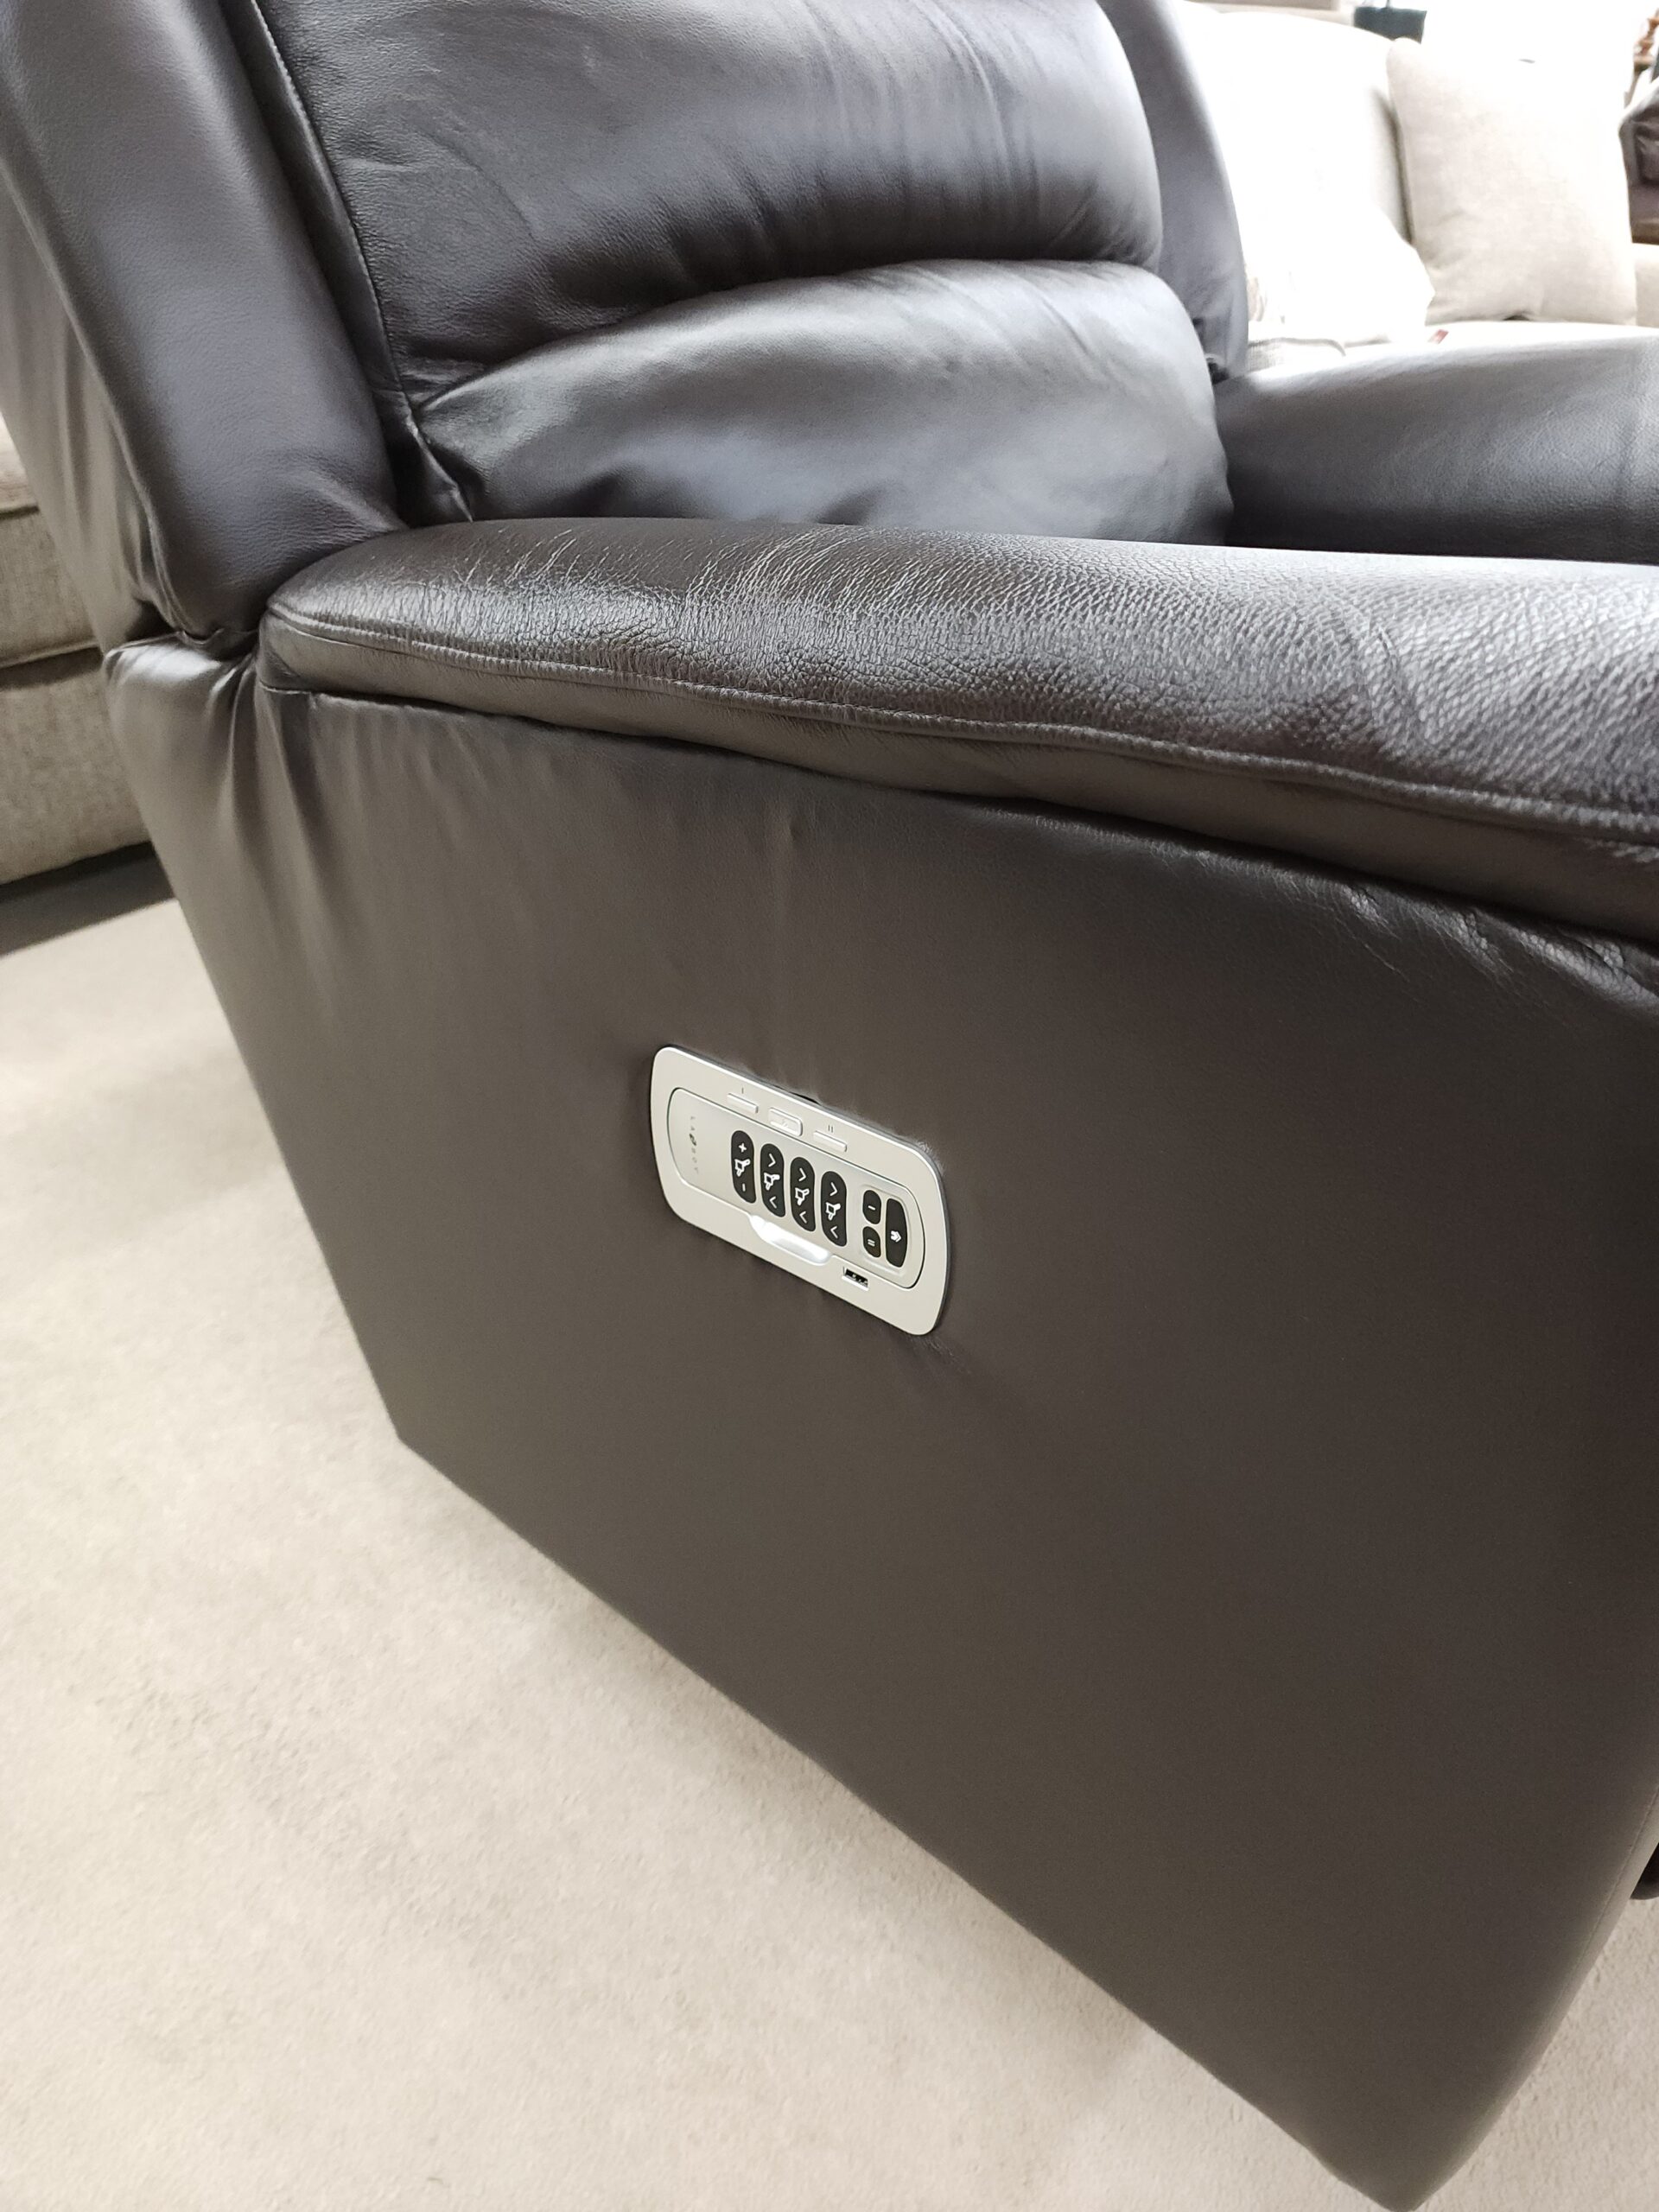 Top 5 Power Recliners at La-Z-Boy with Headrest and Lumbar 